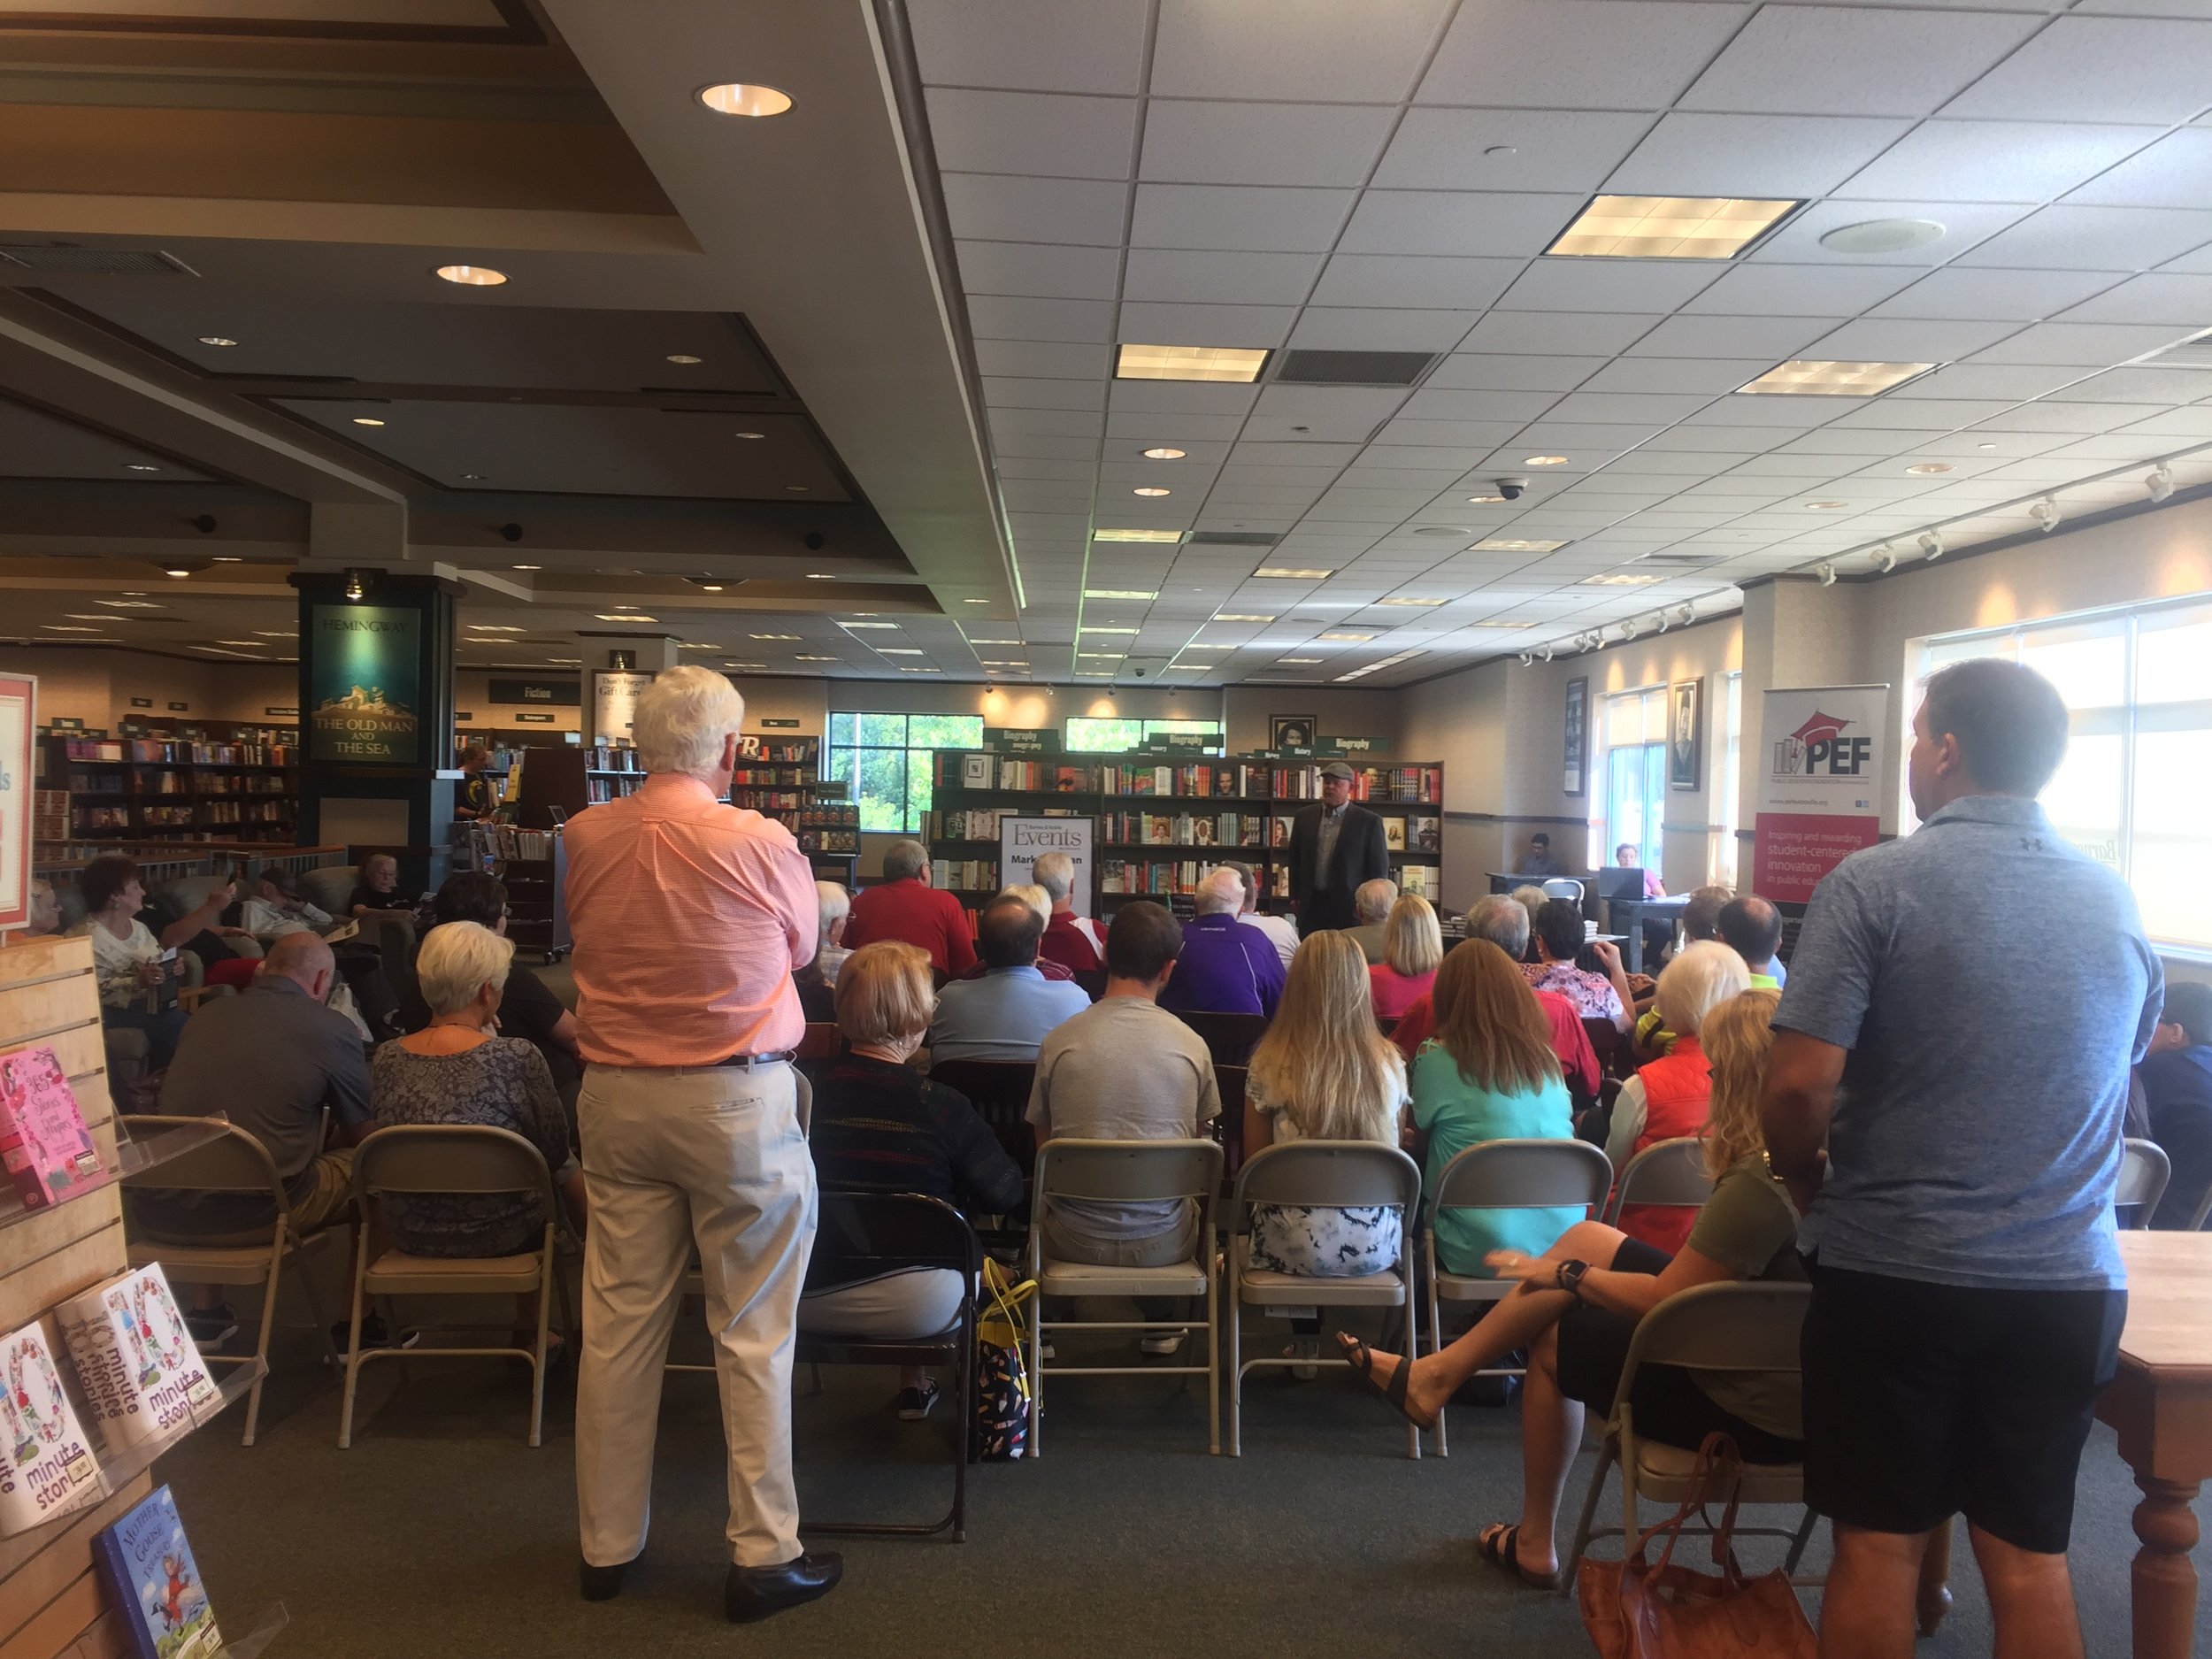  Standing Room Only at the Evansville Barnes &amp; Noble. The man in the pink shirt is a very special guest, by the way: My Evansville Central High School Journalism teacher, Edwin Cole. One of the all-time greats! So nice to see him and his wife Sha